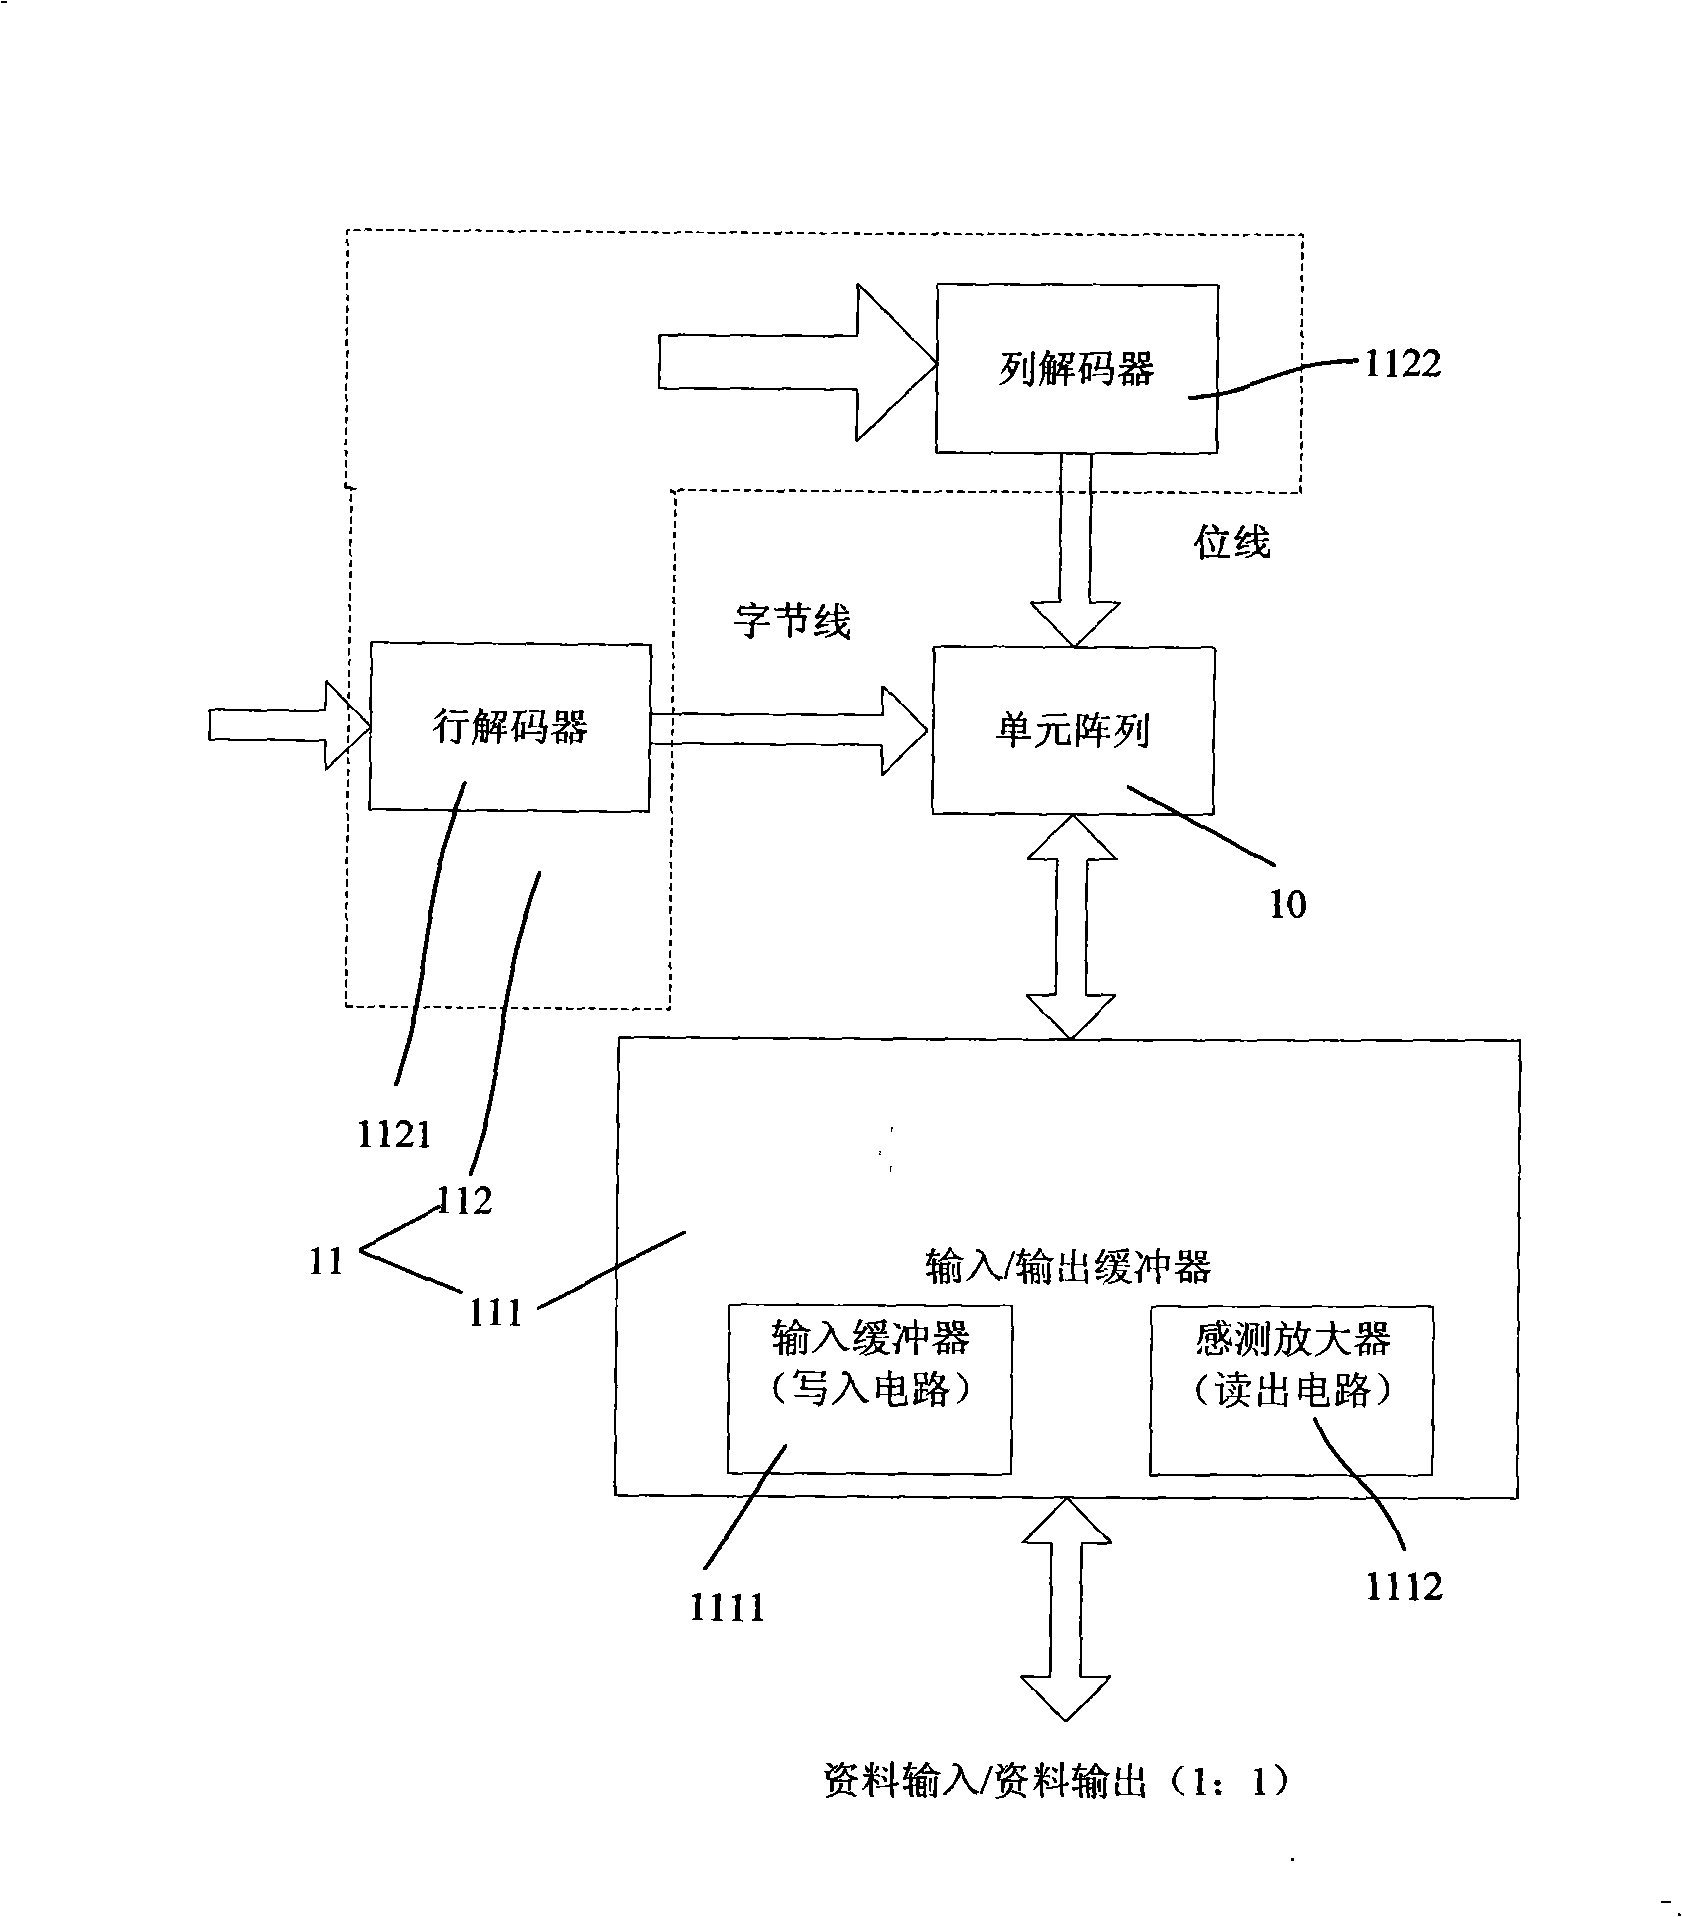 Apparatus for burning pagination of scrubbed and programmable ROM as well as control method thereof